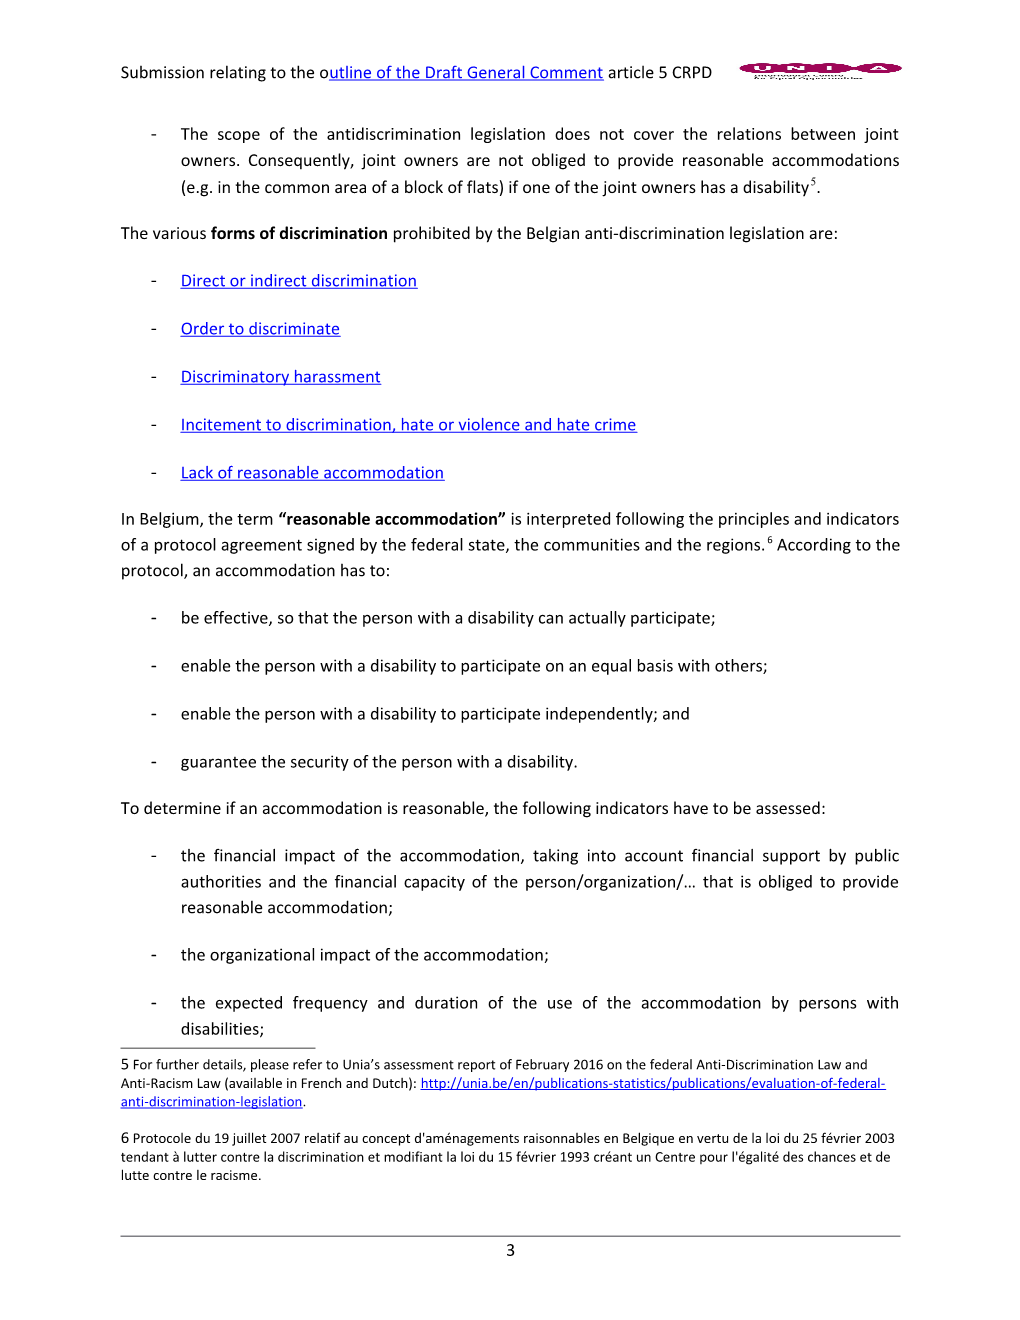 Submission Relating to the Outline of the Draft General Comment on Article 5